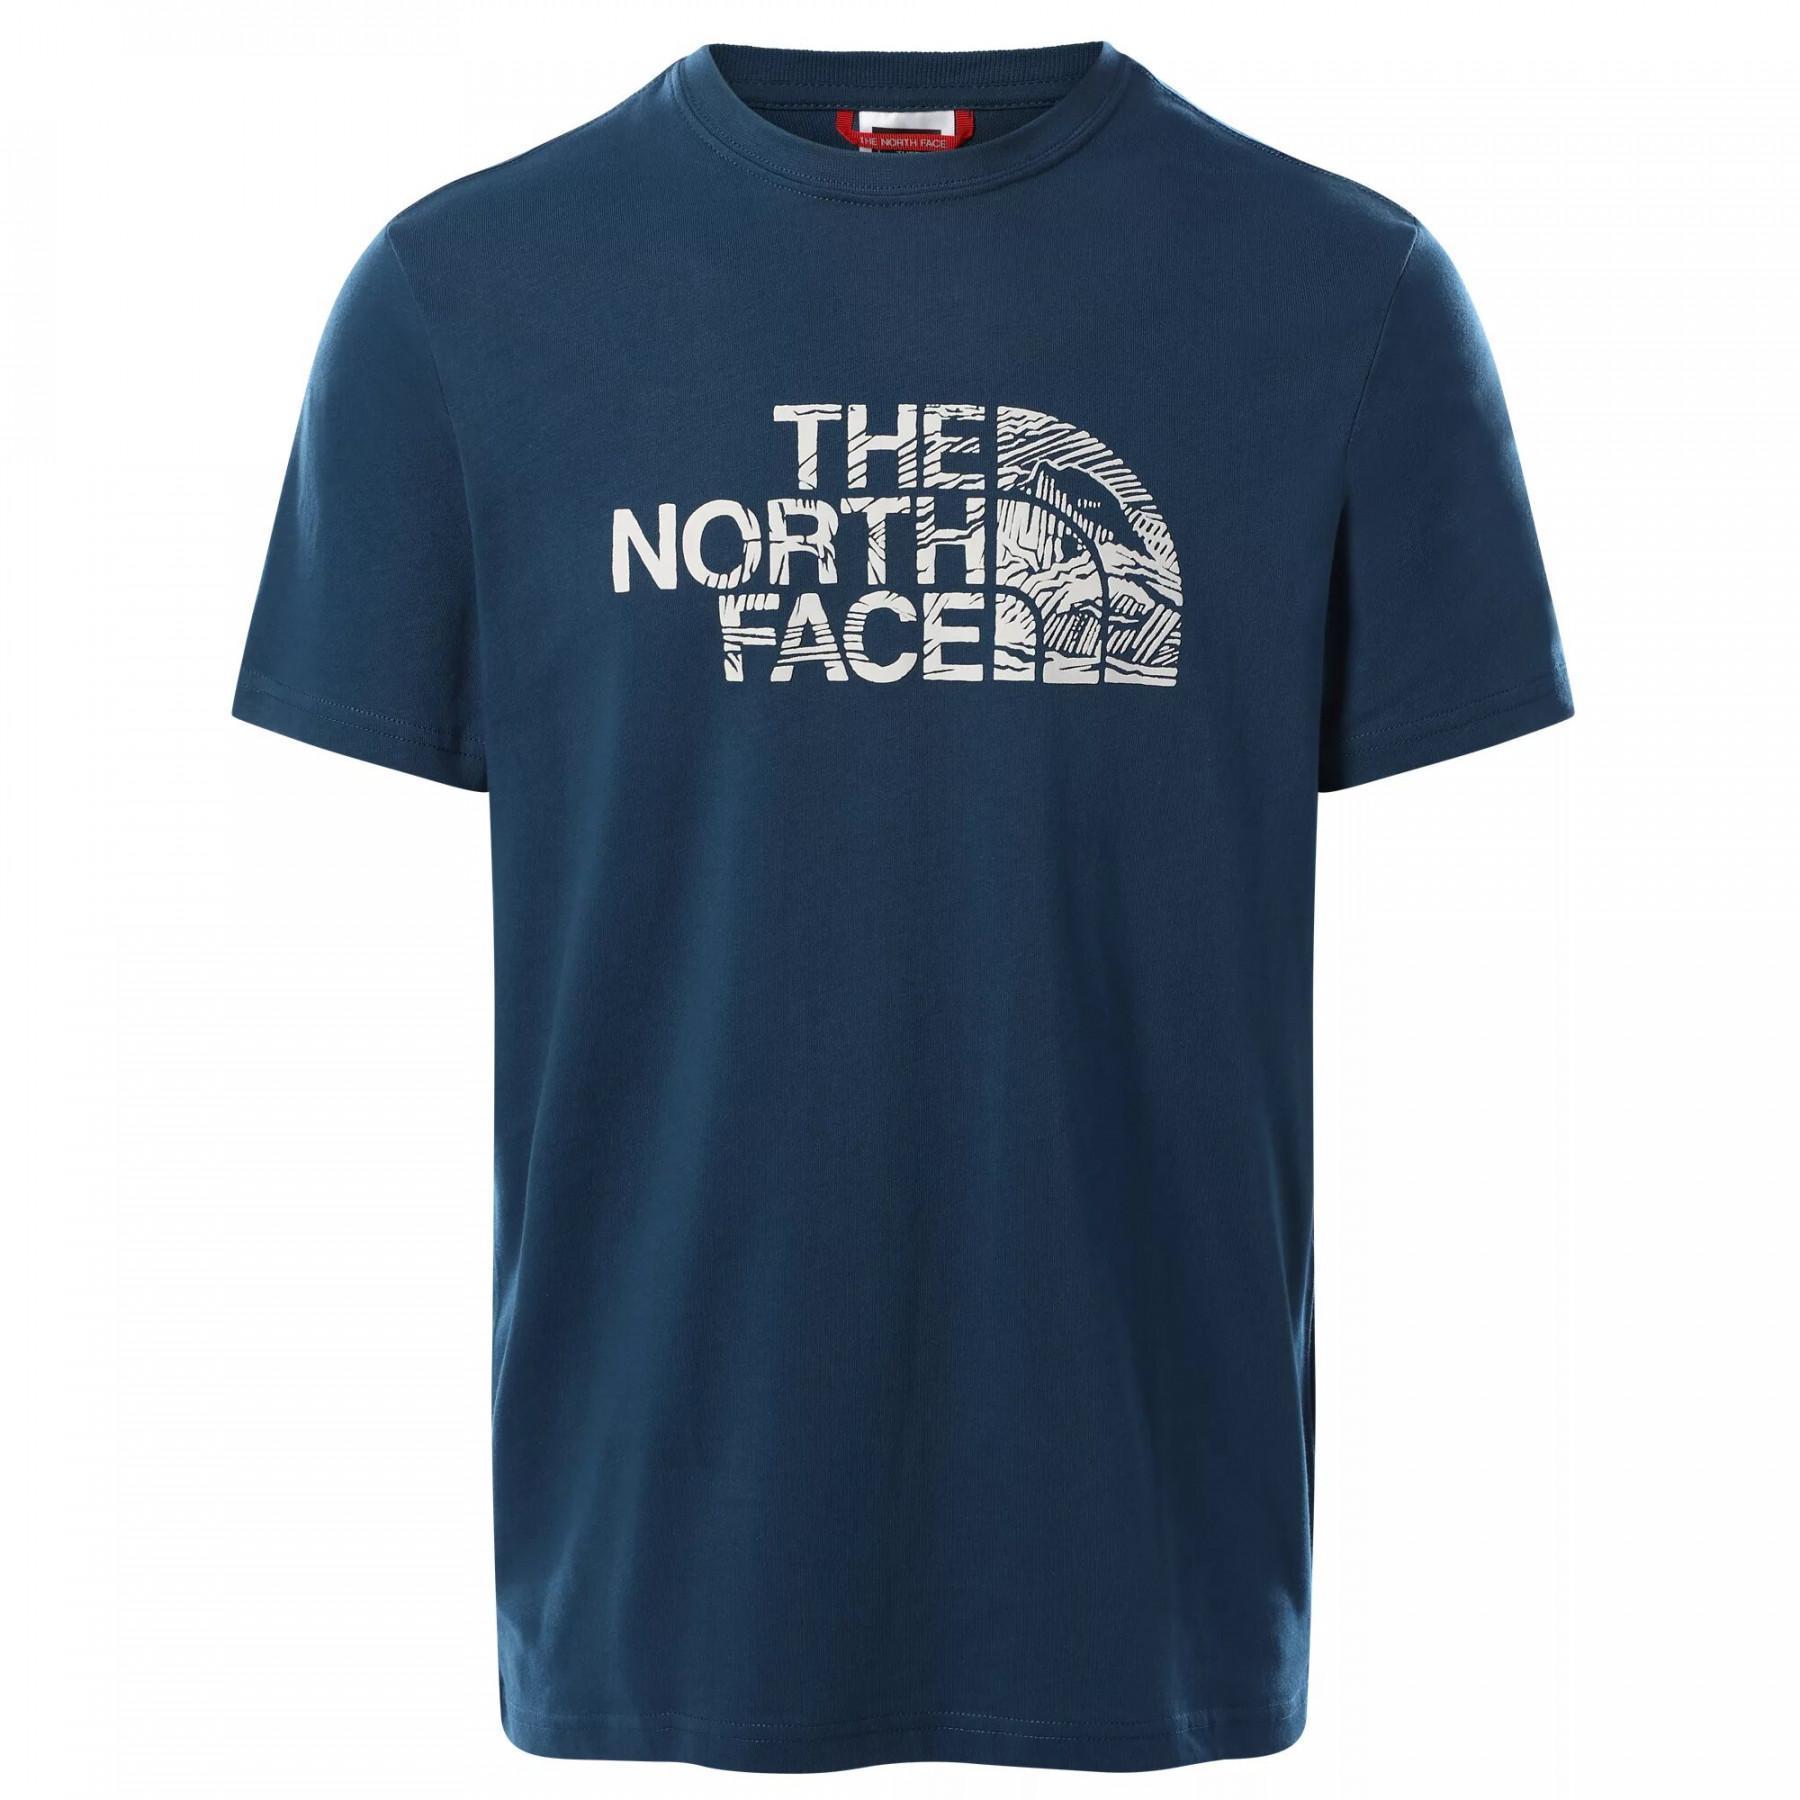 T-shirt Clássica The North Face Woodcut